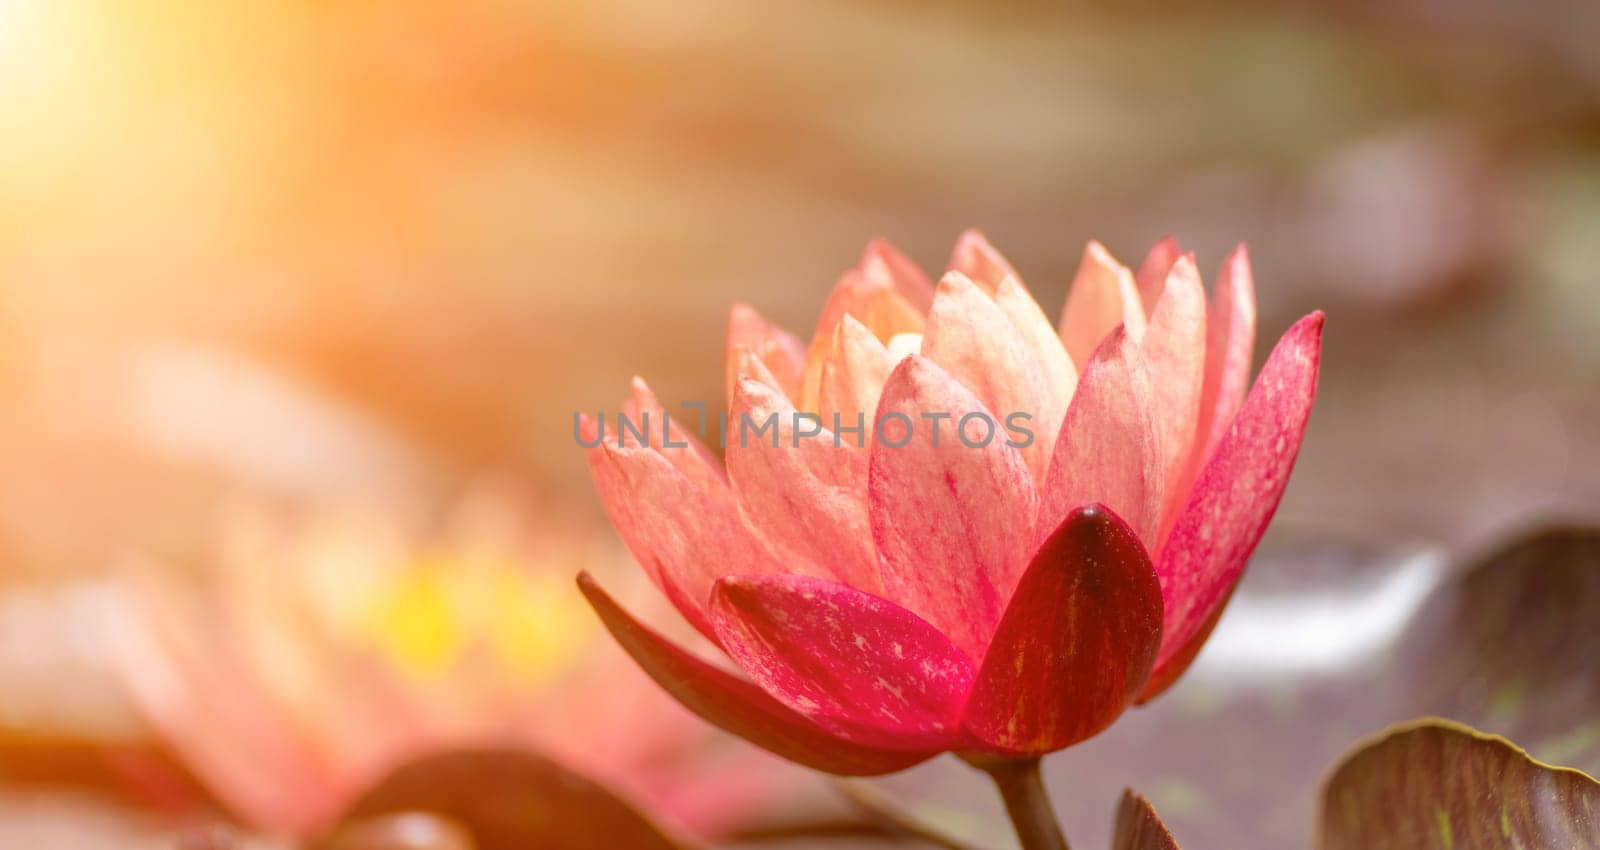 Pink lotus water lily flower in pond, waterlily with green leaves blooming.